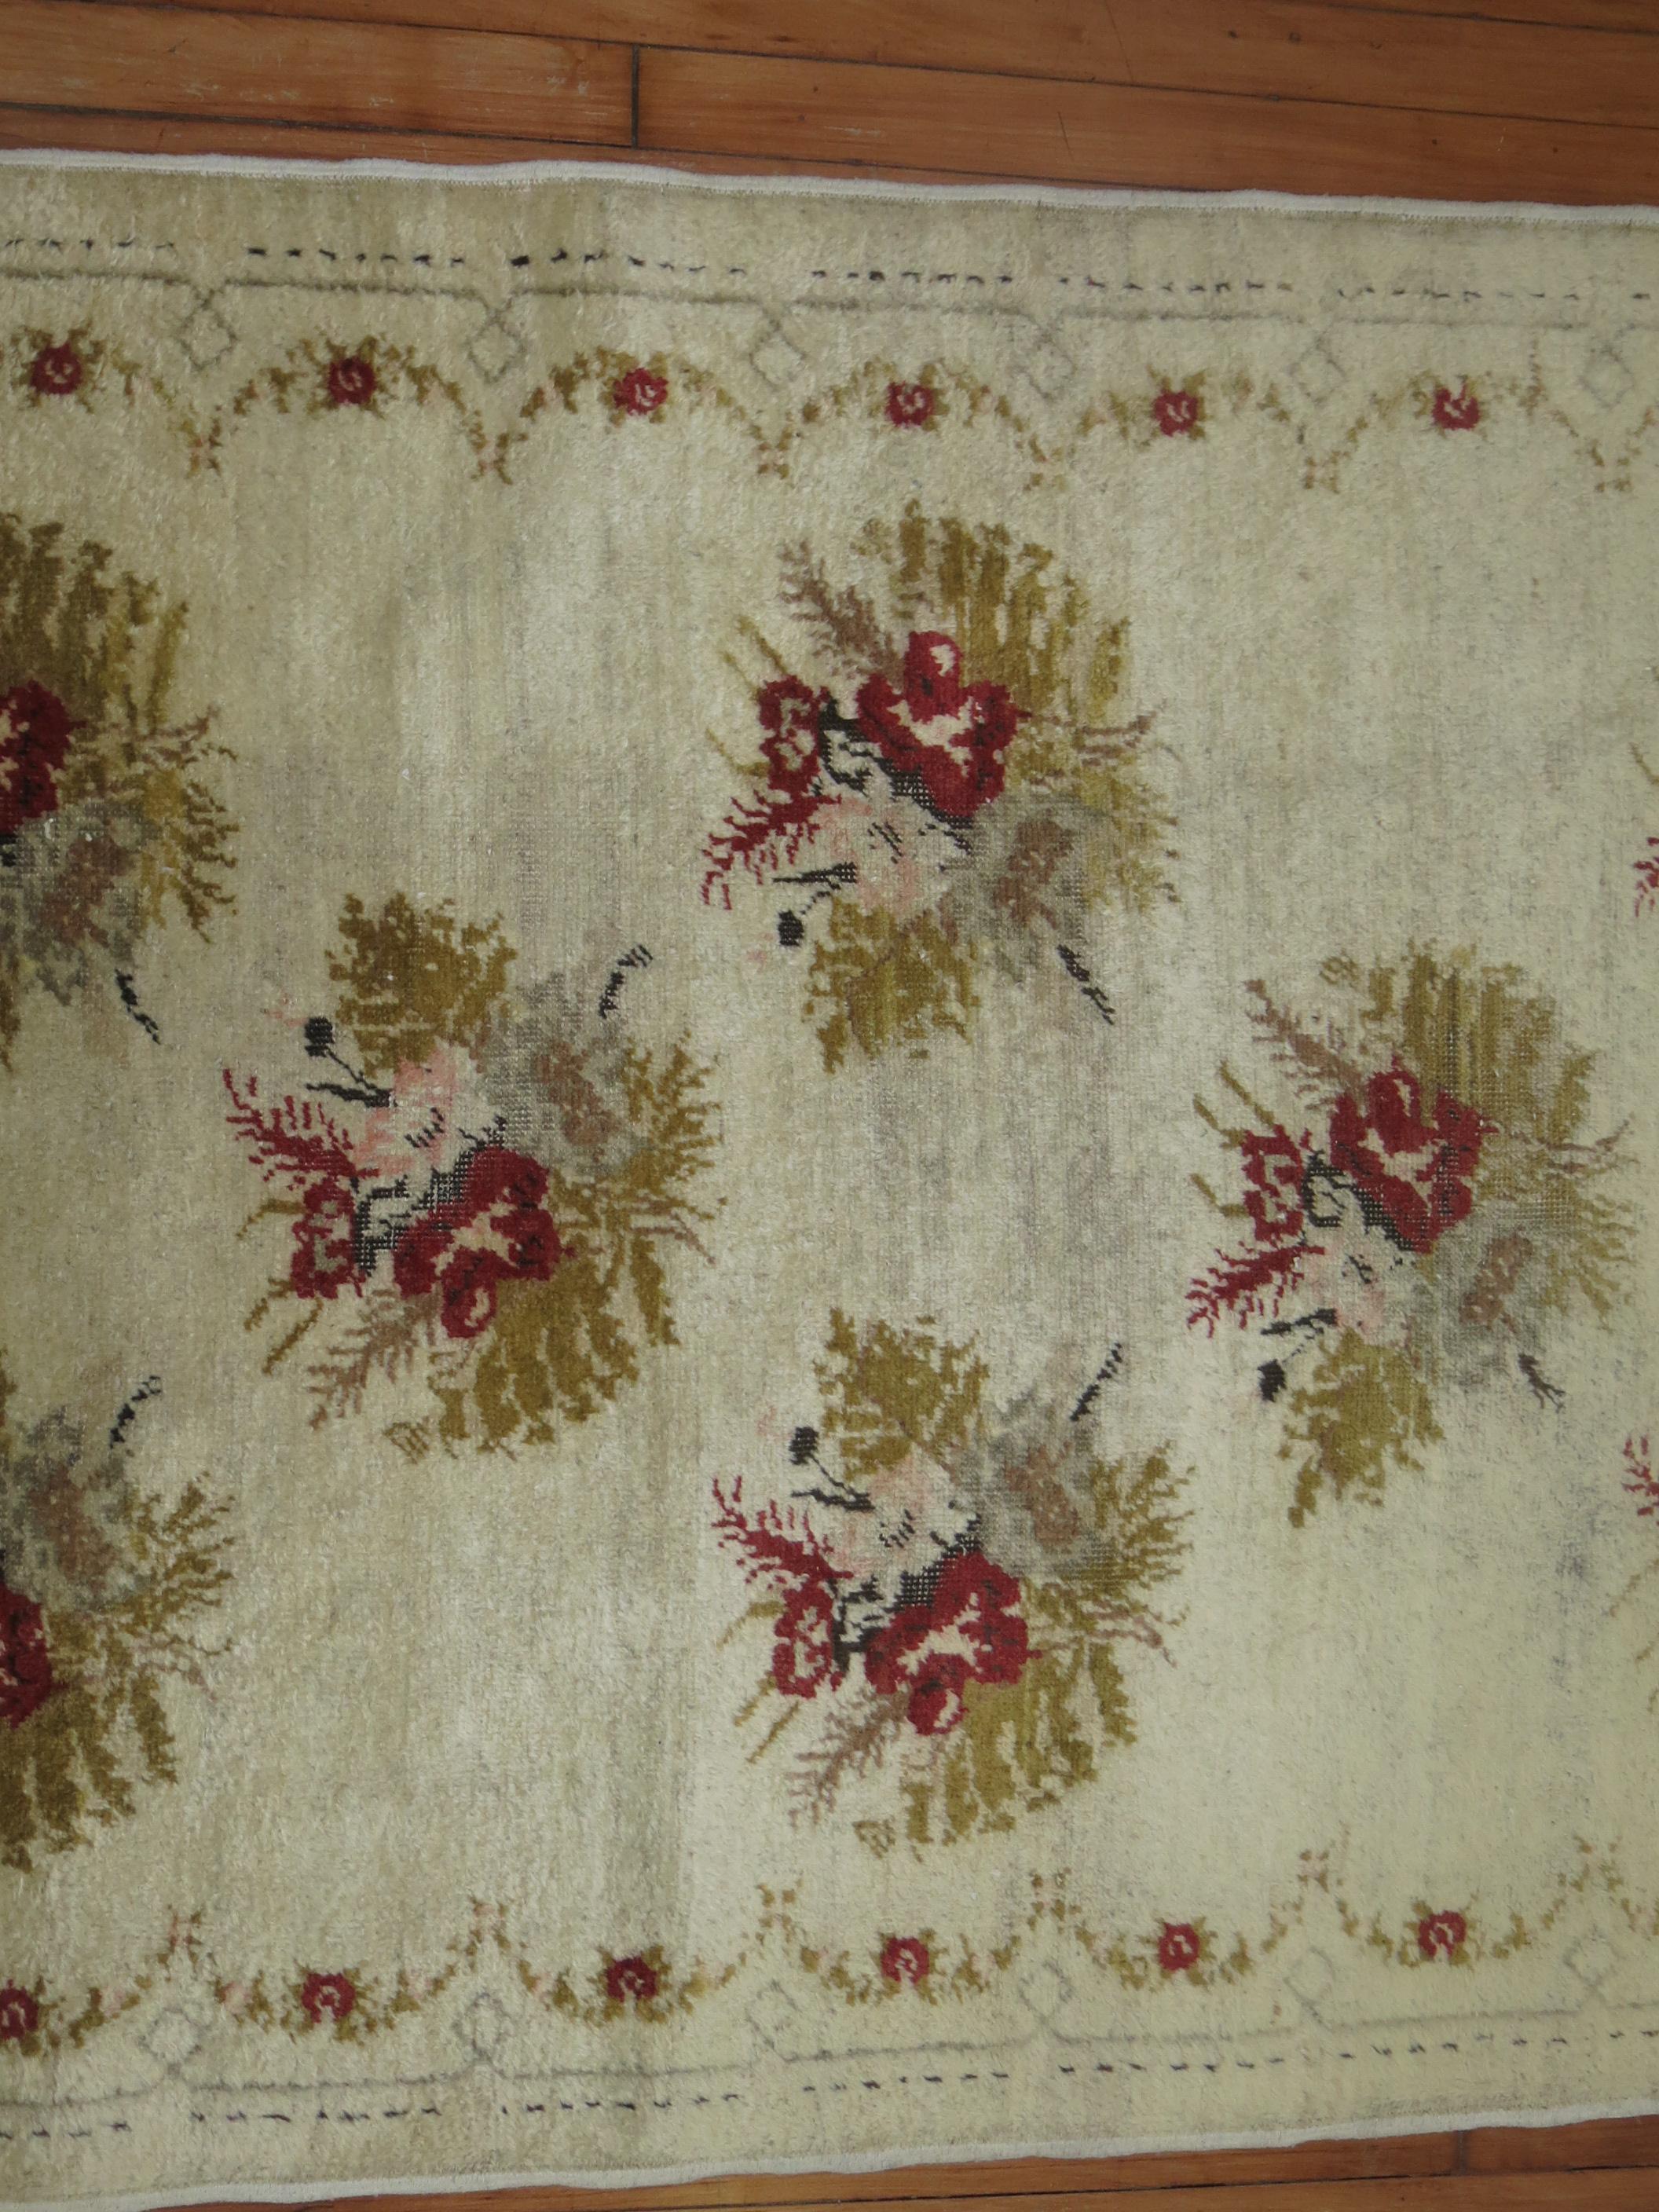 1940s Turkish Runner with a flower design on an ivory ground

Measures: 3'8'' x 8'10''.